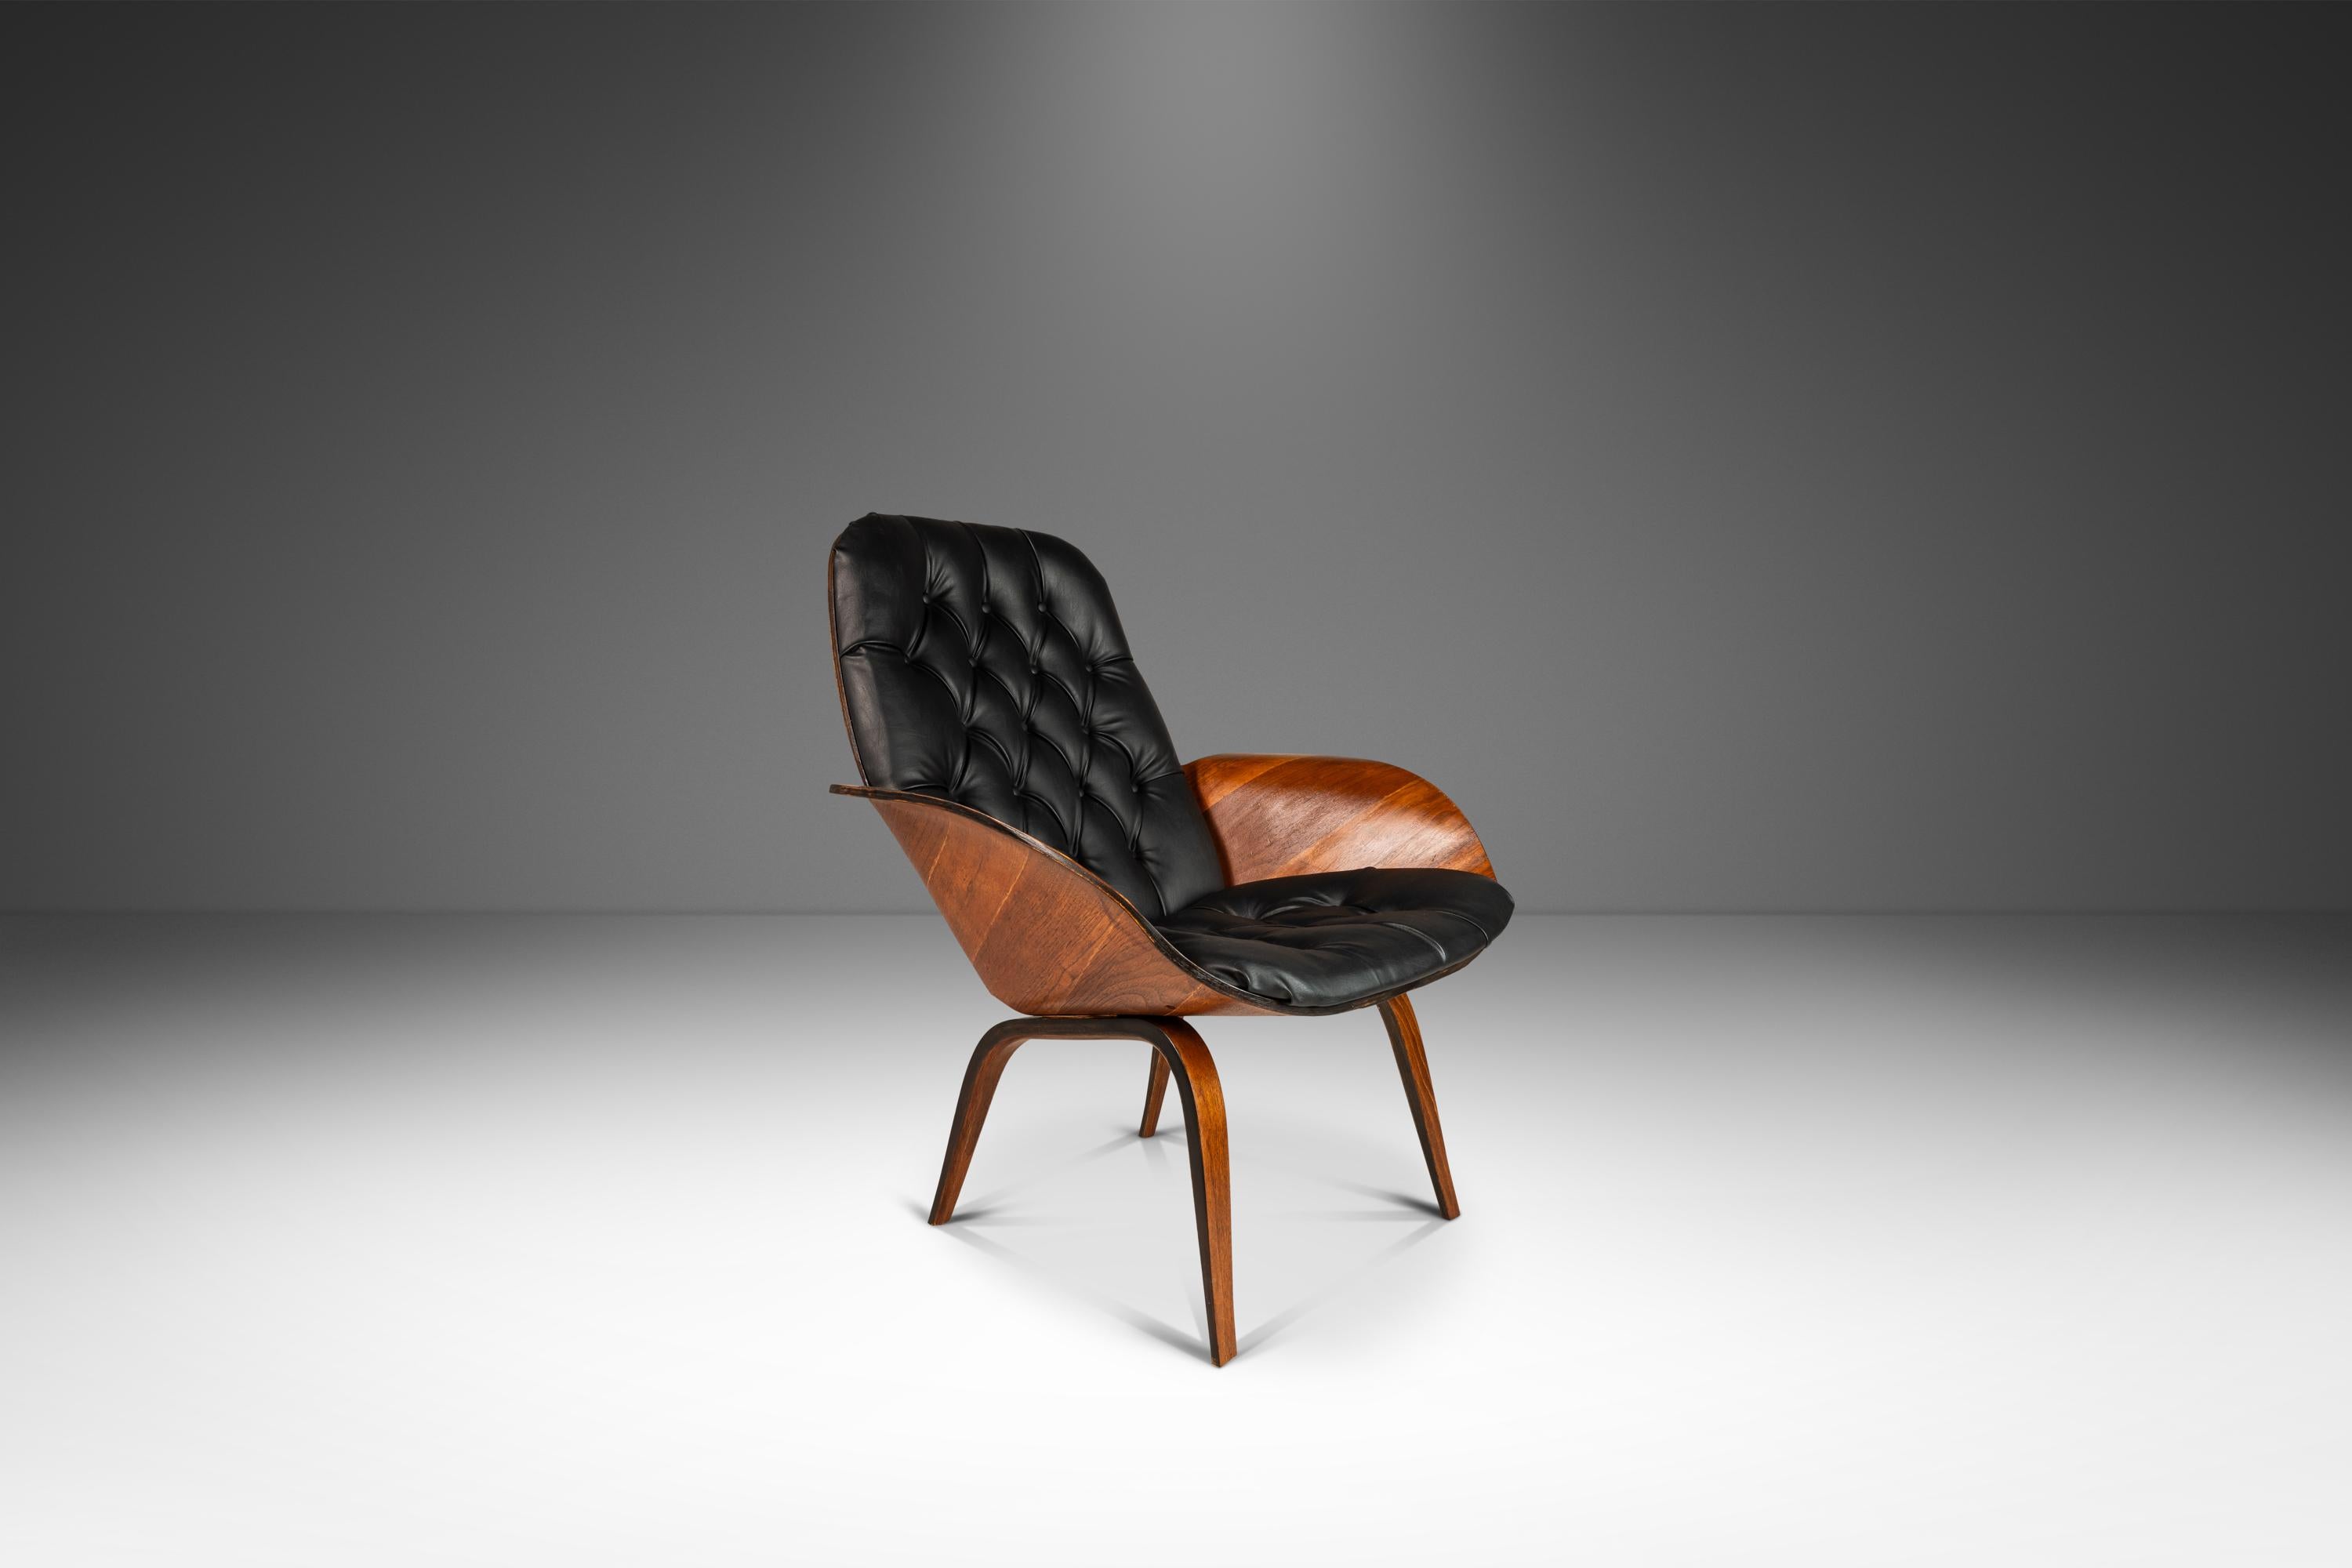 Mrs. Lounge Chair in Walnut & Vinyl by George Mulhauser for Plycraft, c. 1960s For Sale 6